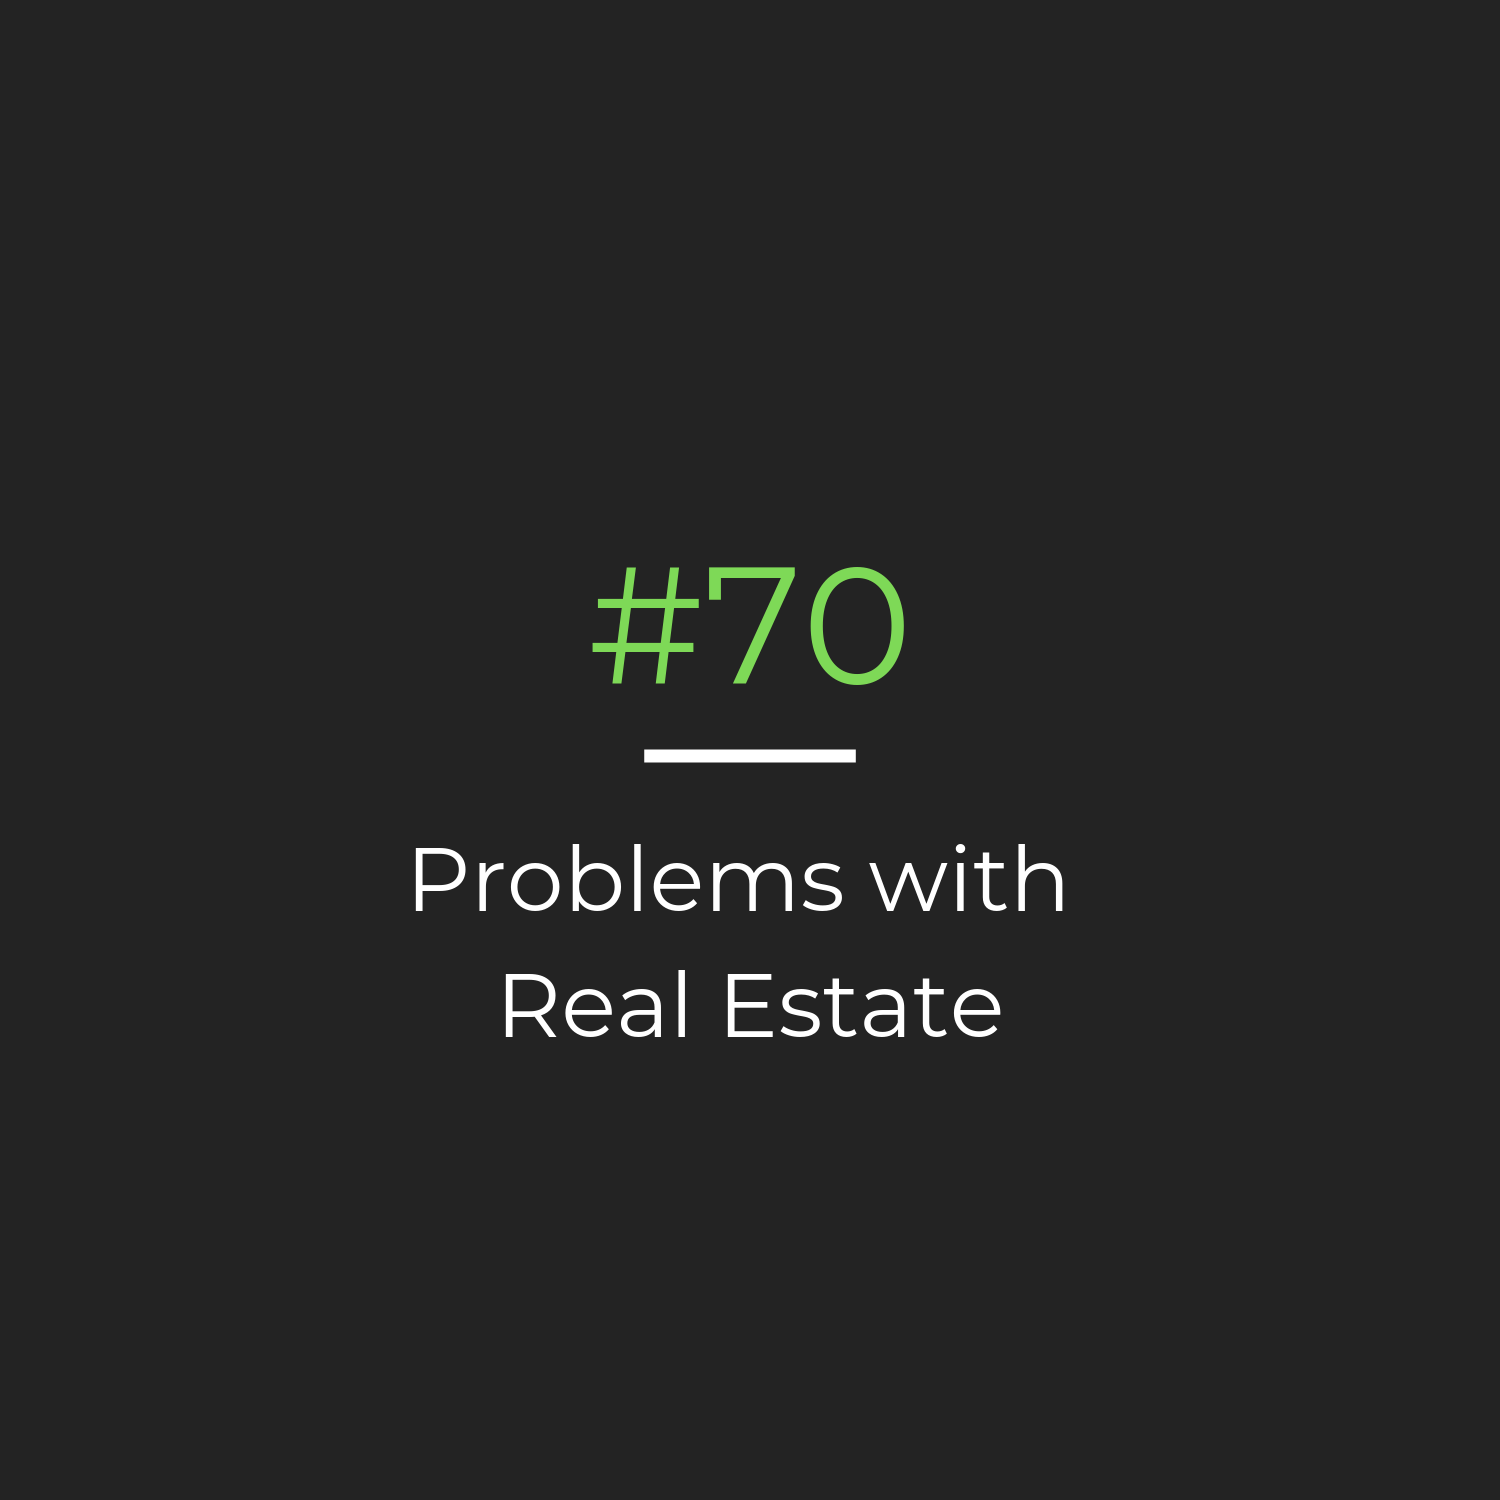 Edition #70: Problems with Real Estate